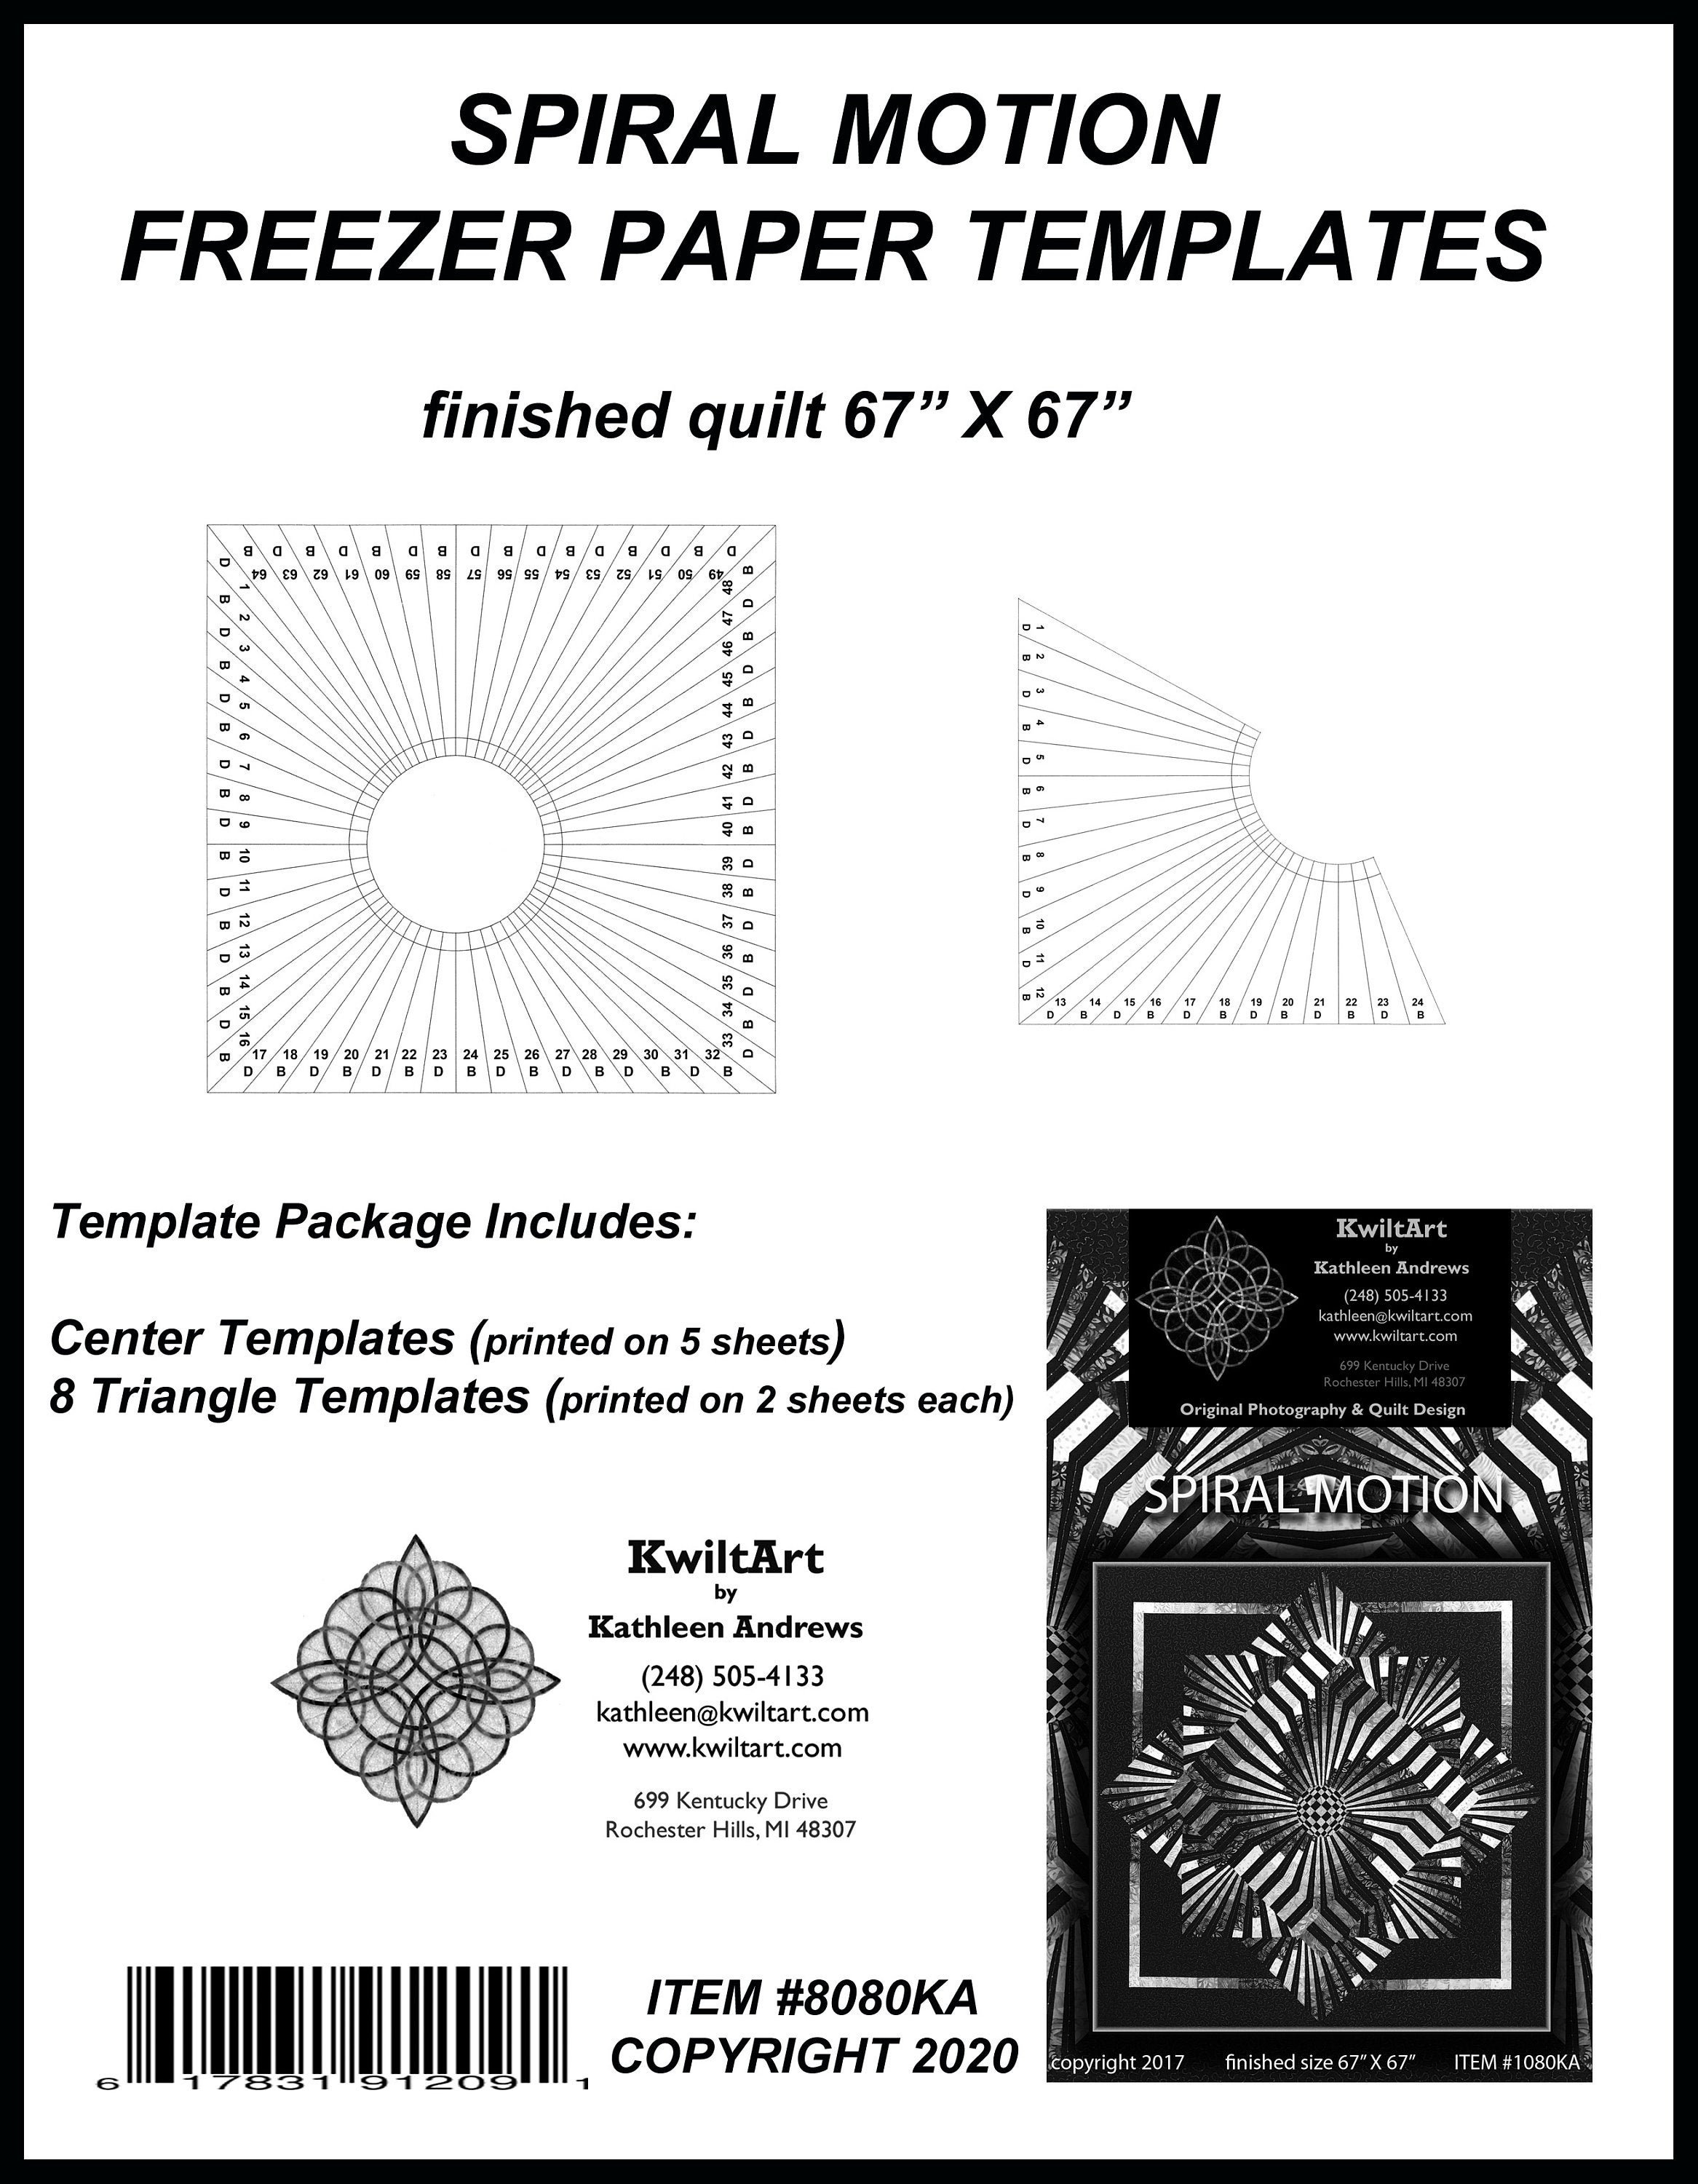 Spiral Motion Freezer Paper Template Package 